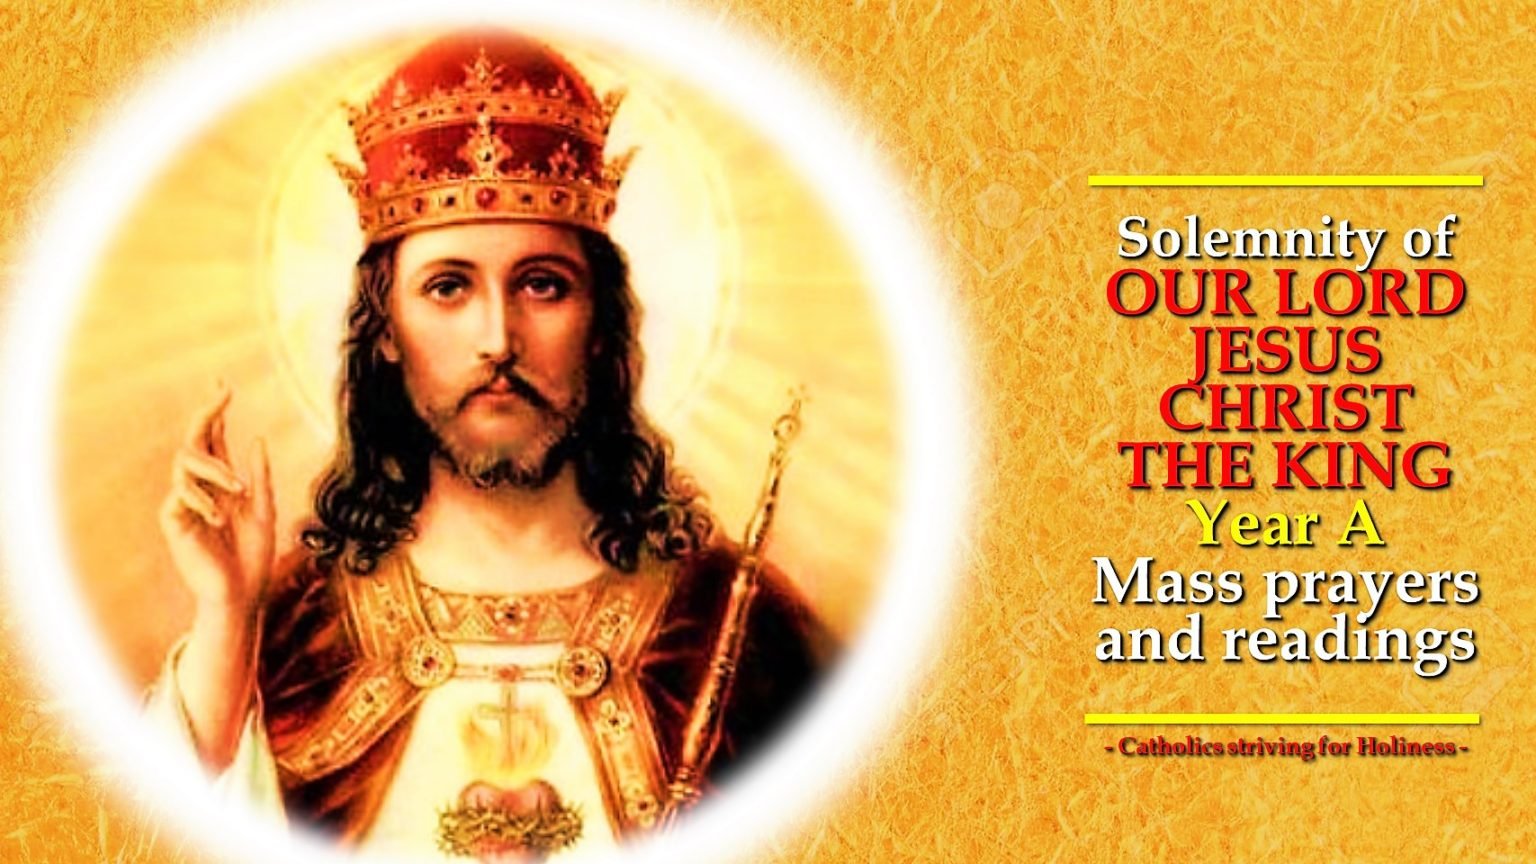 SOLEMNITY OF CHRIST THE KING YEAR A MASS PRAYERS AND READINGS ...